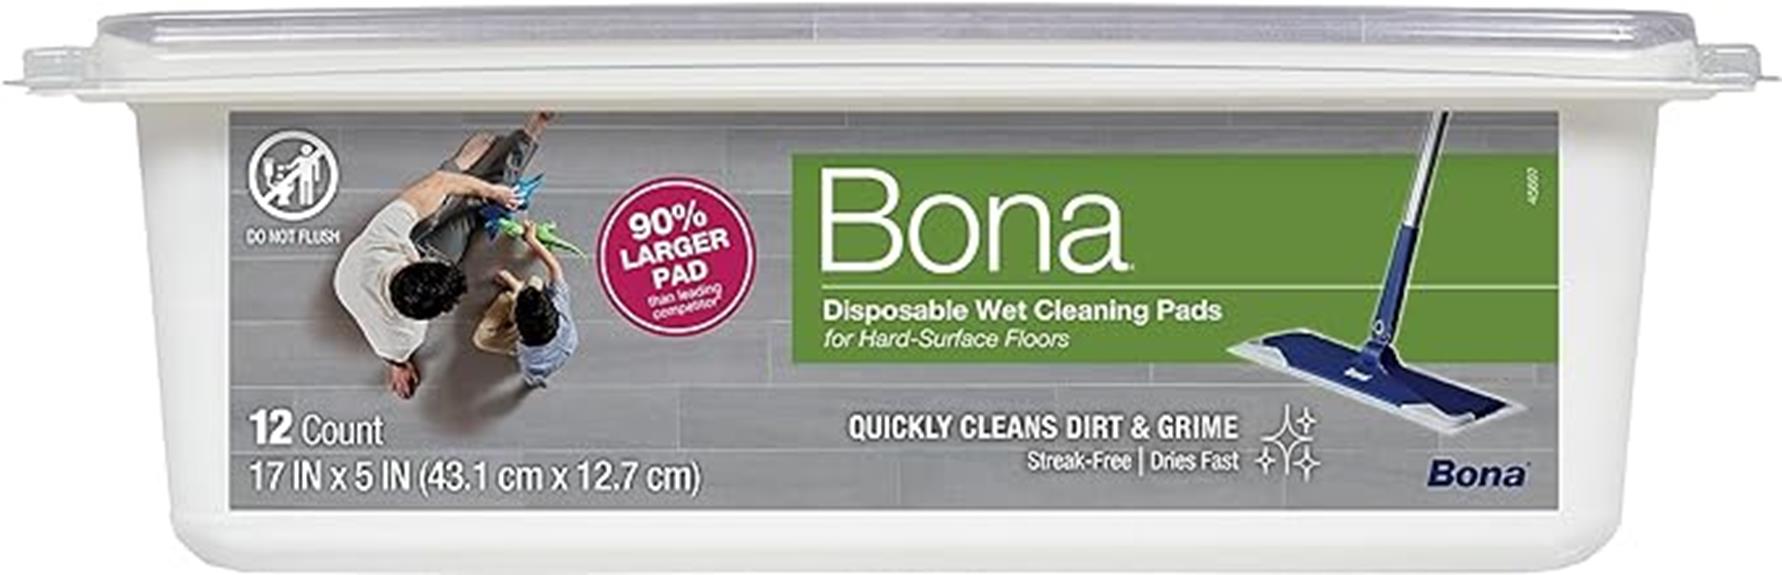 bona disposable wet cleaning pads